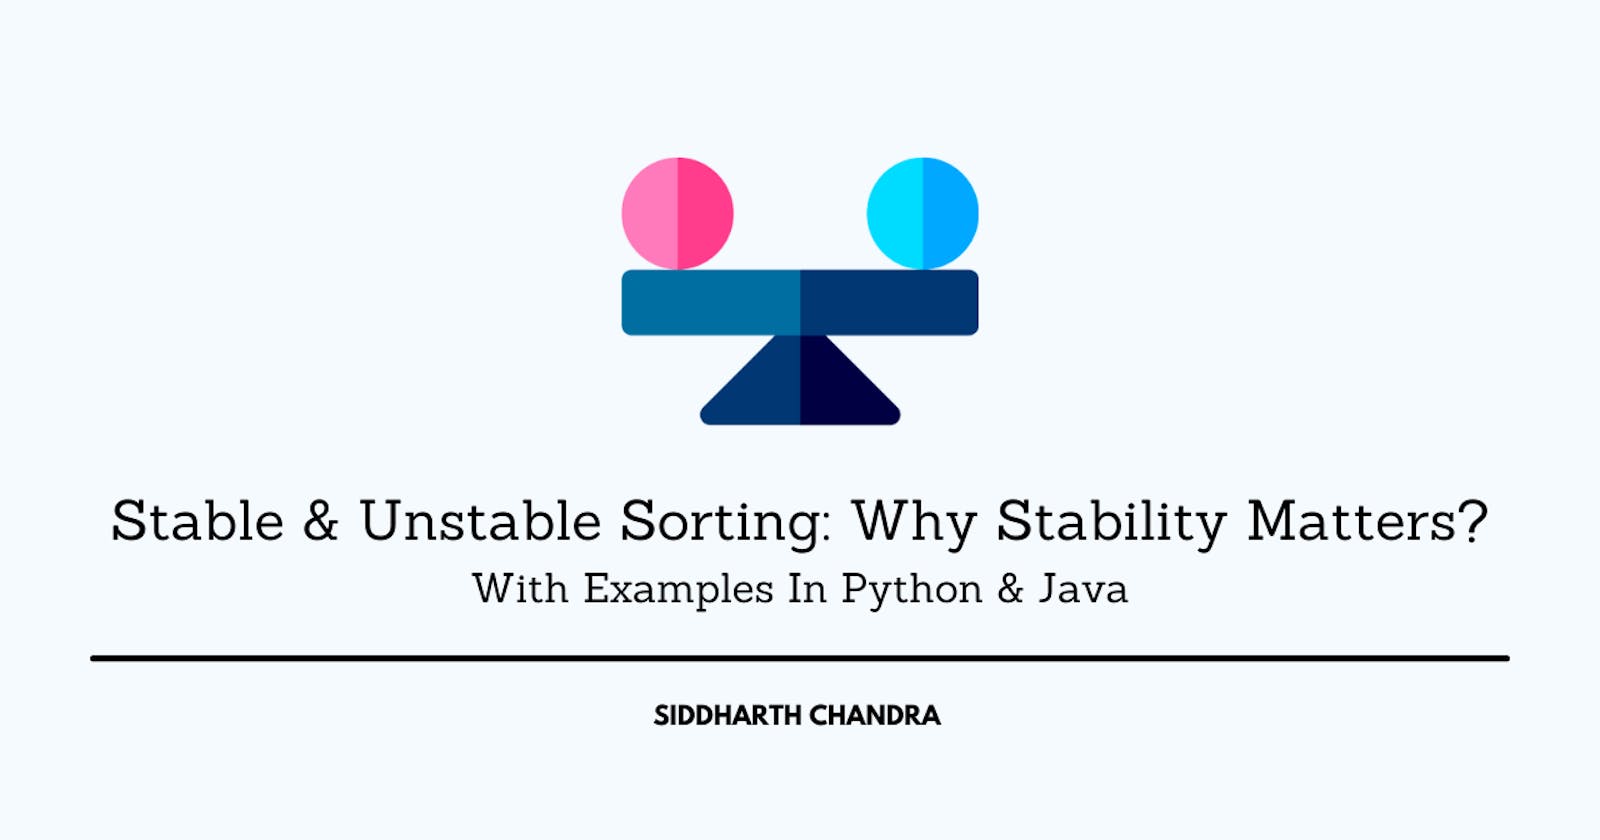 Stable and Unstable Sorting: Why Stability Matters?